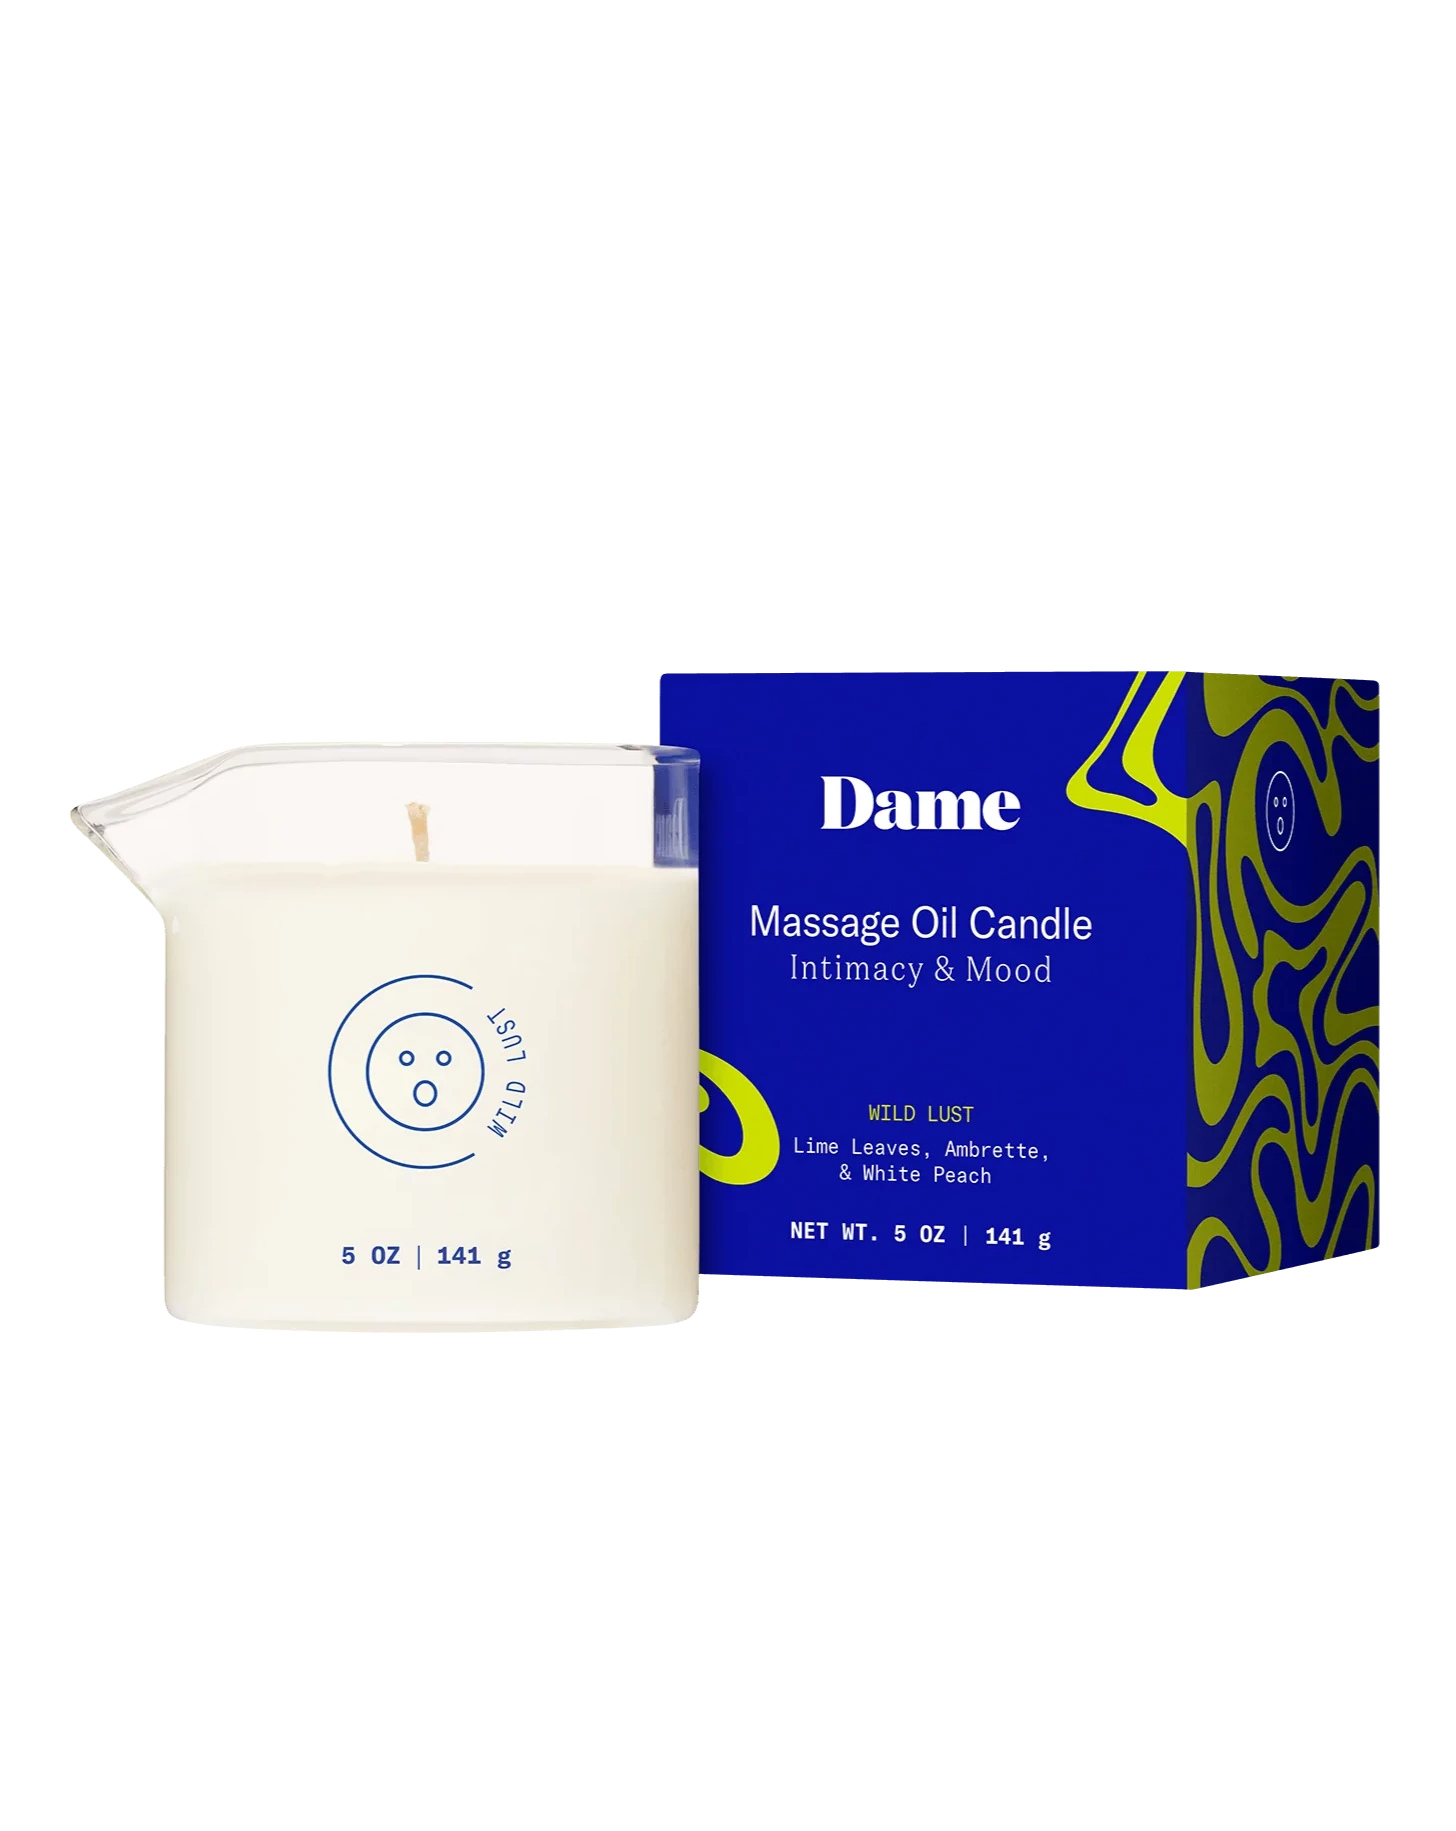 Dame massage oil candle available at Ease Toronto